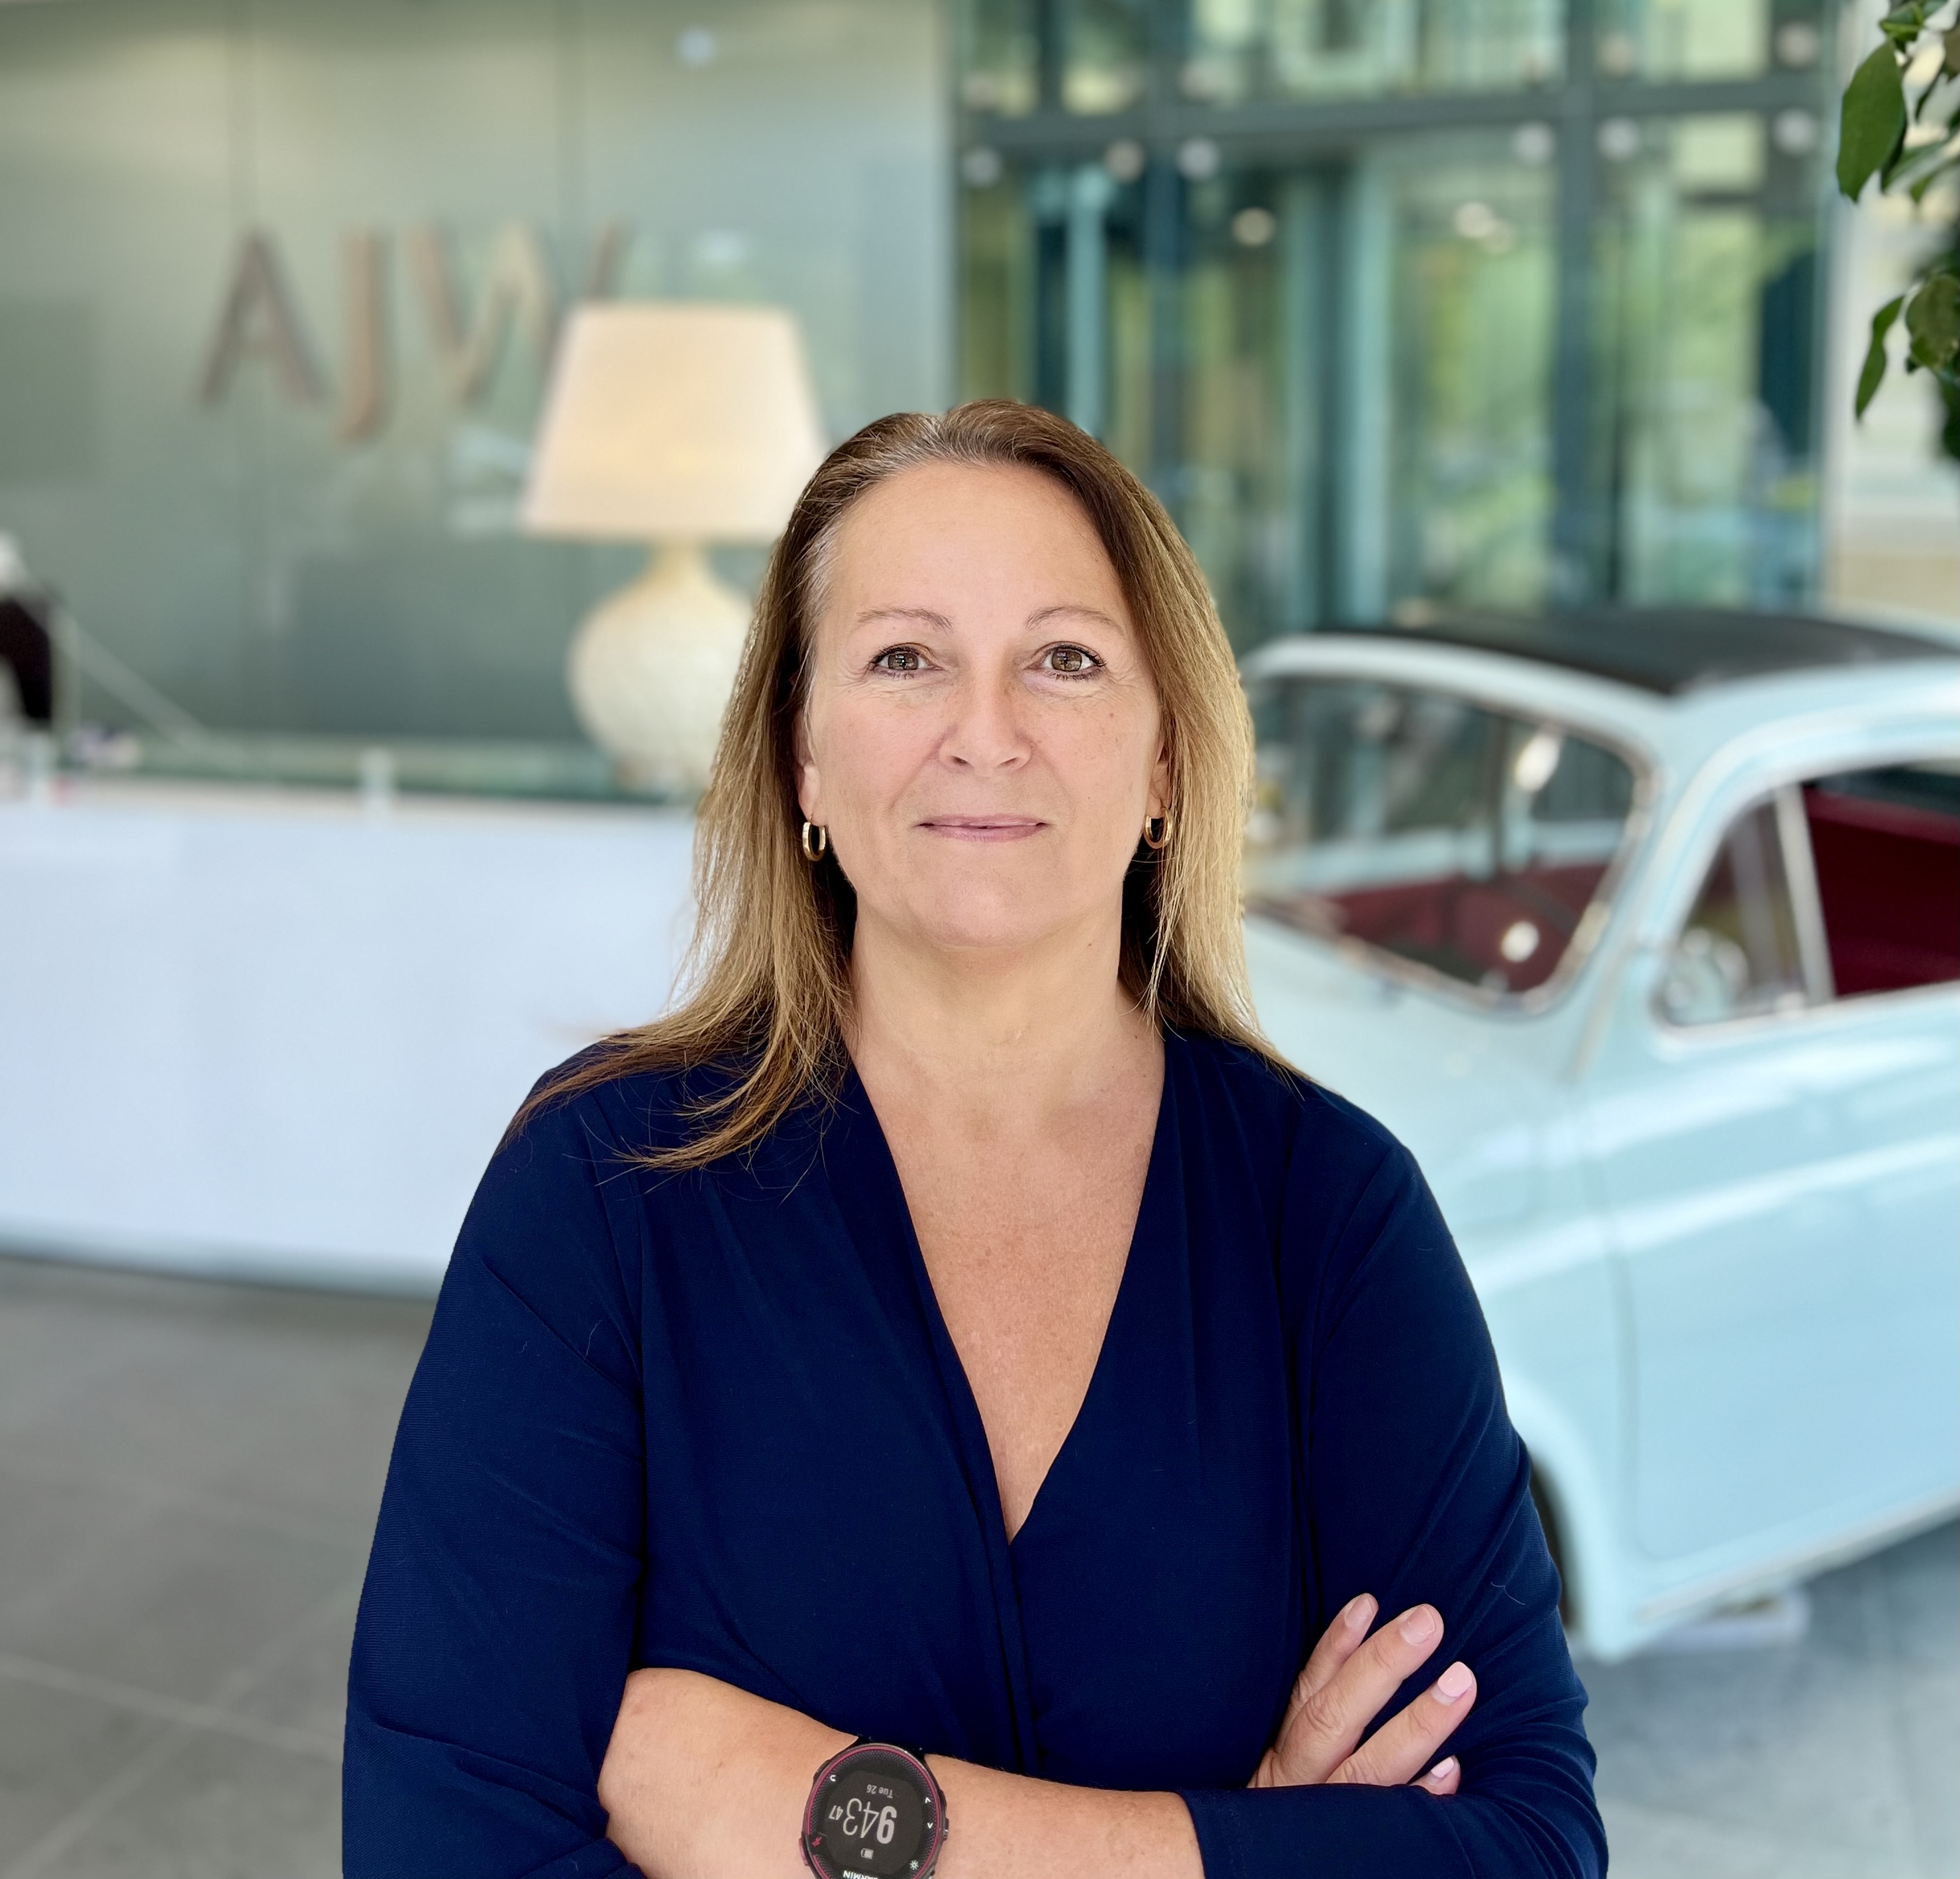 AJW Group appoints Clare Brown as Chief Financial Officer